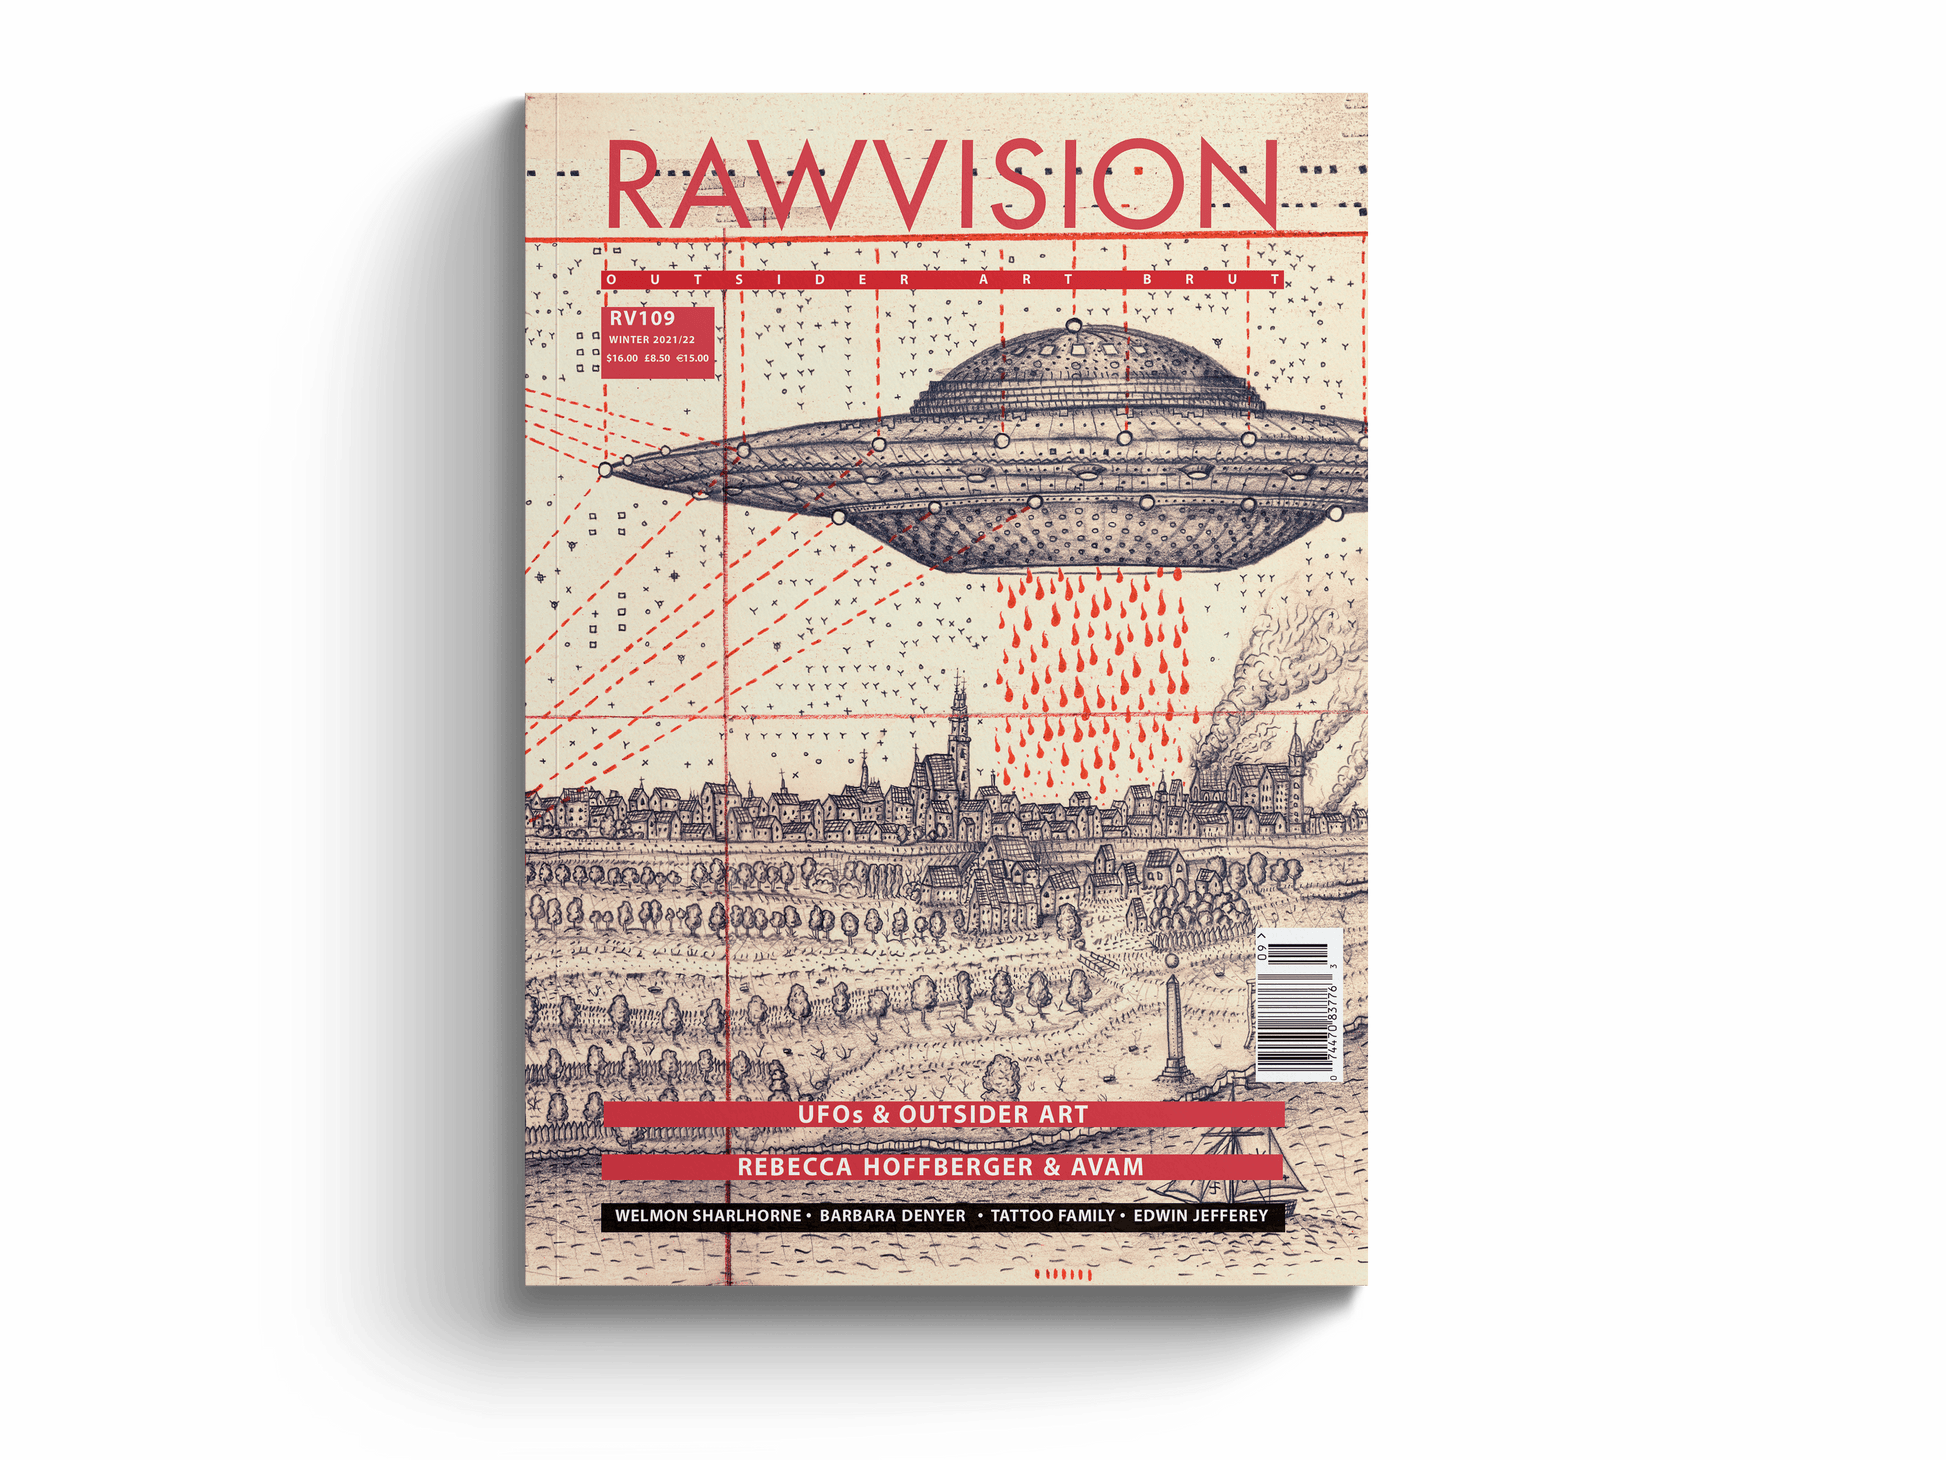 Issue #109 - RAW VISION